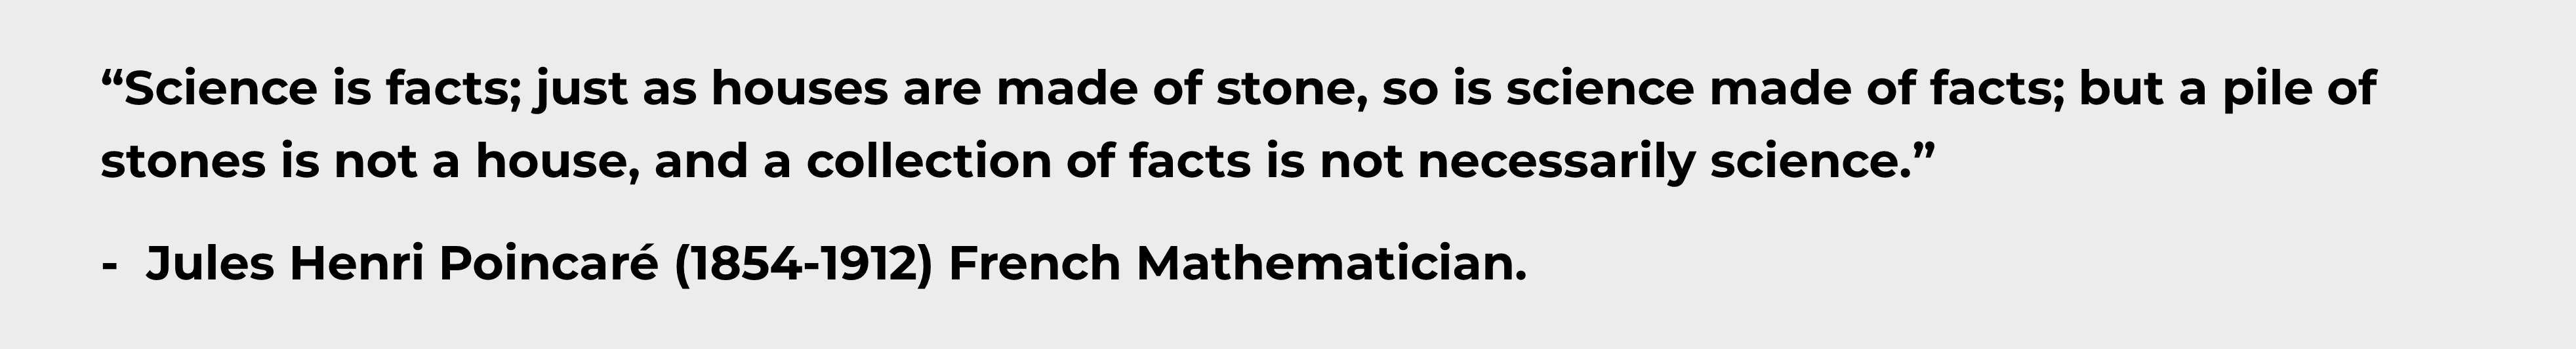 Jules Poincare quote: Science is facts; just as houses are made of stone, so is science is made of facts; but a pile of stones is not a house, and a collection of facts is not necessarily science.